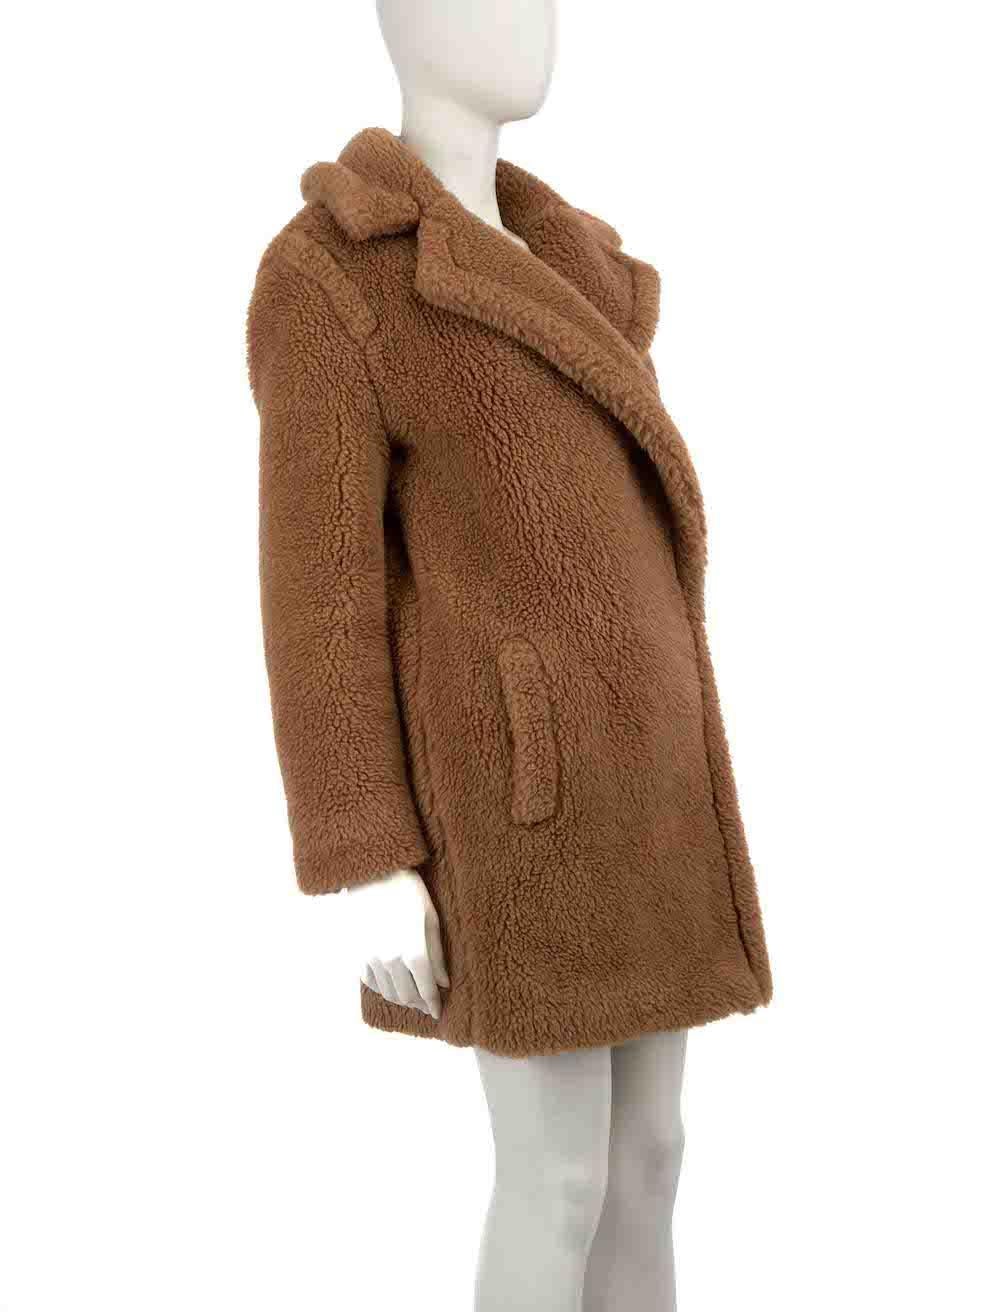 CONDITION is Very good. Hardly any visible wear to coat is evident on this used Max Mara designer resale item.
 
 
 
 Details
 
 
 Brown
 
 Camel wool
 
 Teddy coat
 
 Button up fastening
 
 2x Side pockets
 
 
 
 
 
 Made in Italy
 
 
 
